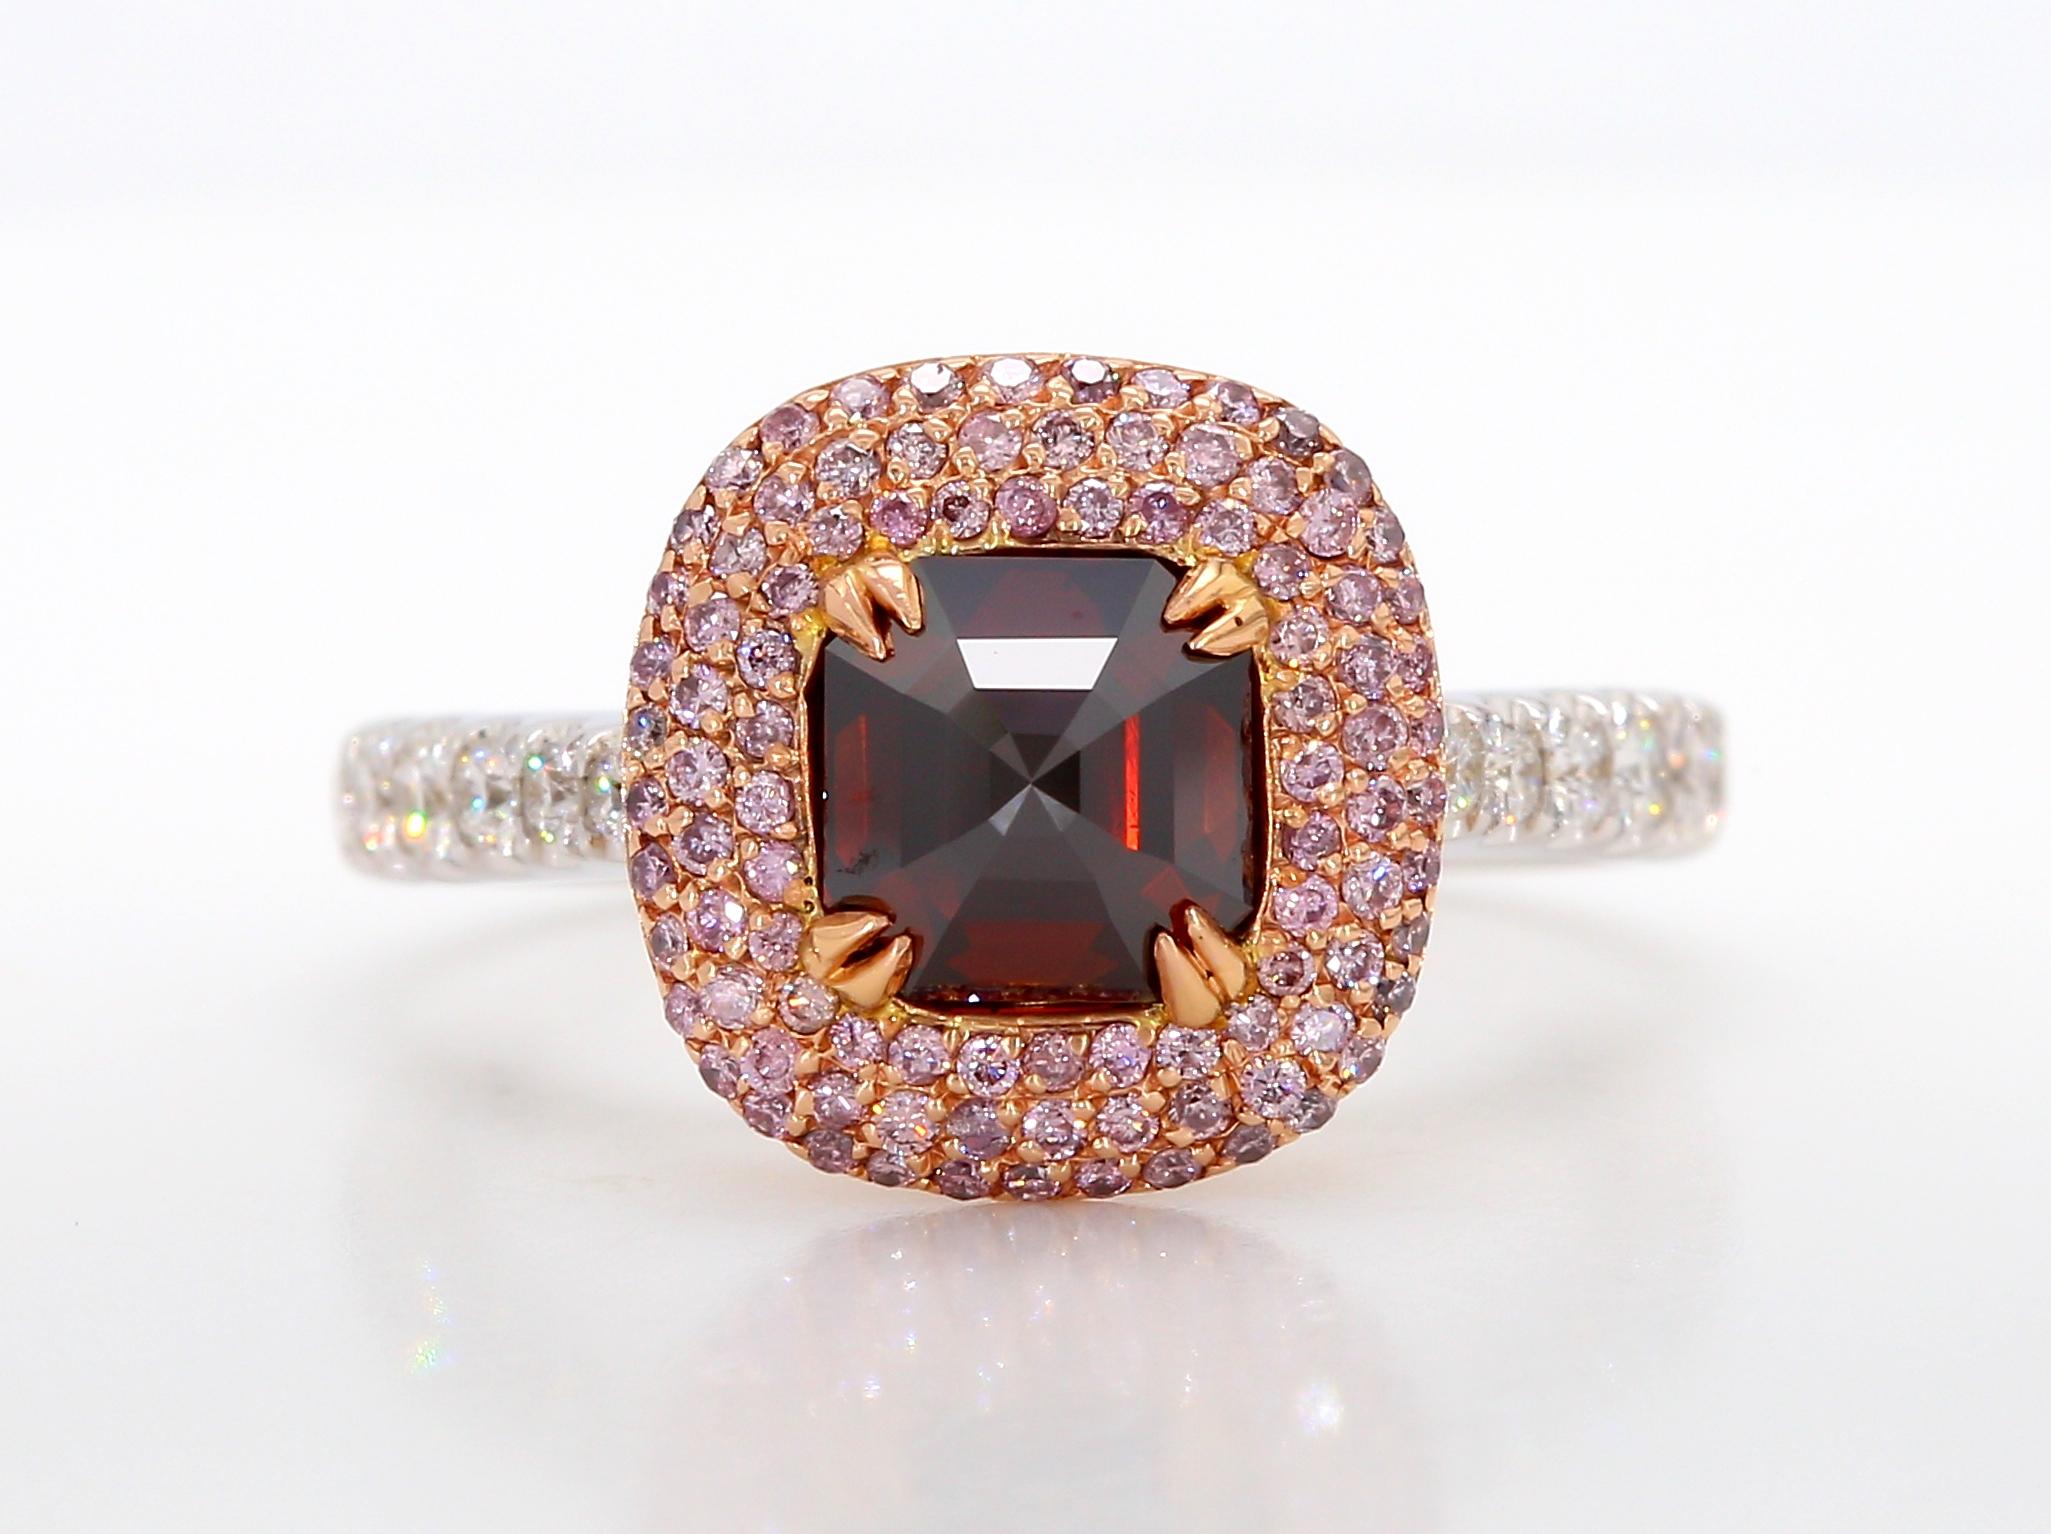 An exceptional engagement ring style features a one-of-a-kind GIA-certified, 1+ carat Fancy Red-Brown Emerald-cut diamond with I1 clarity. It is beautifully nestled in a pave setting of round brilliant pink diamonds, totaling 0.34 carats.